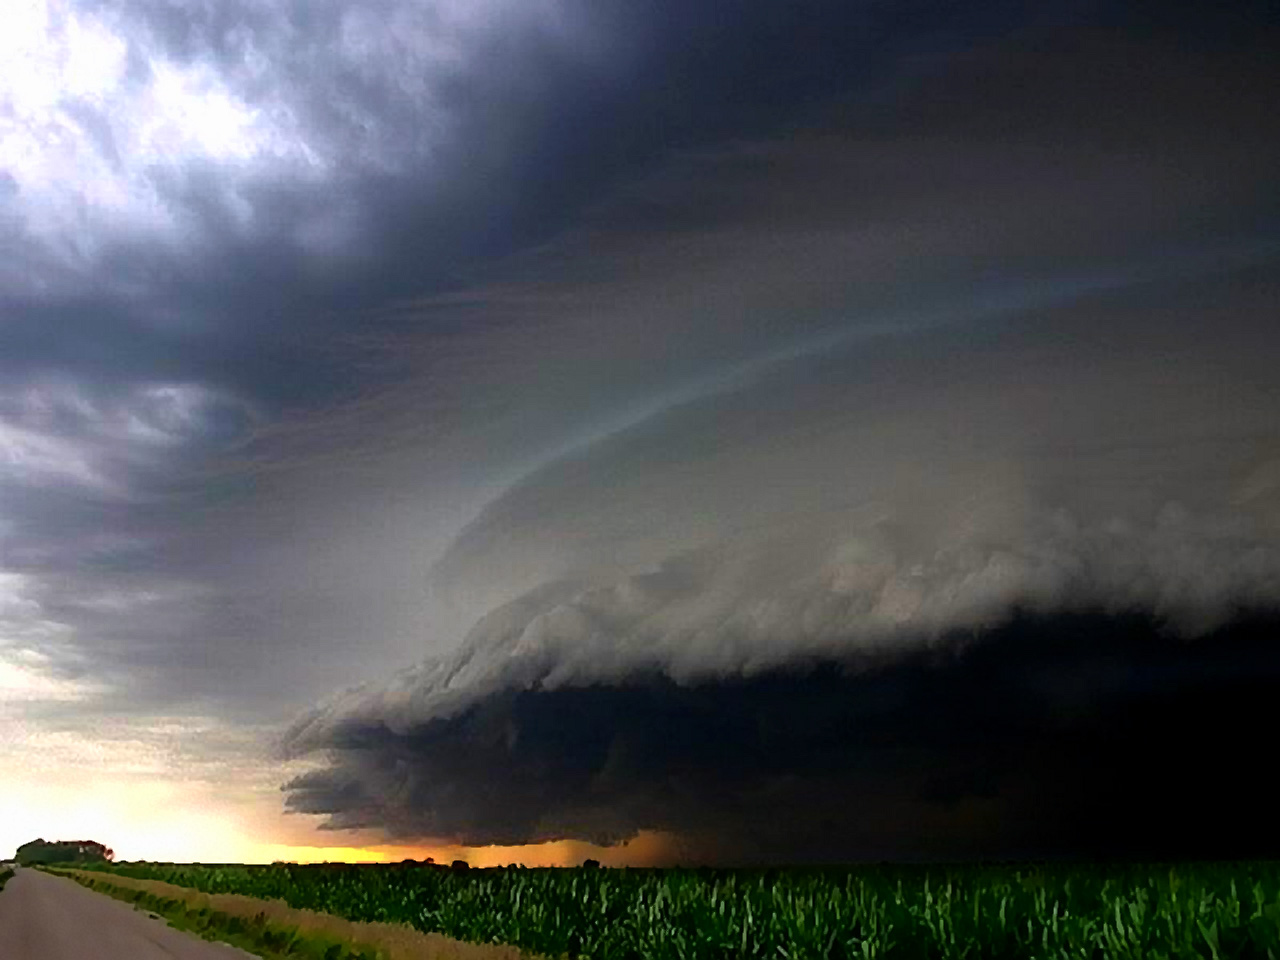 Large Wall Cloud Weather Wallpaper Image Featuring Tornadoes